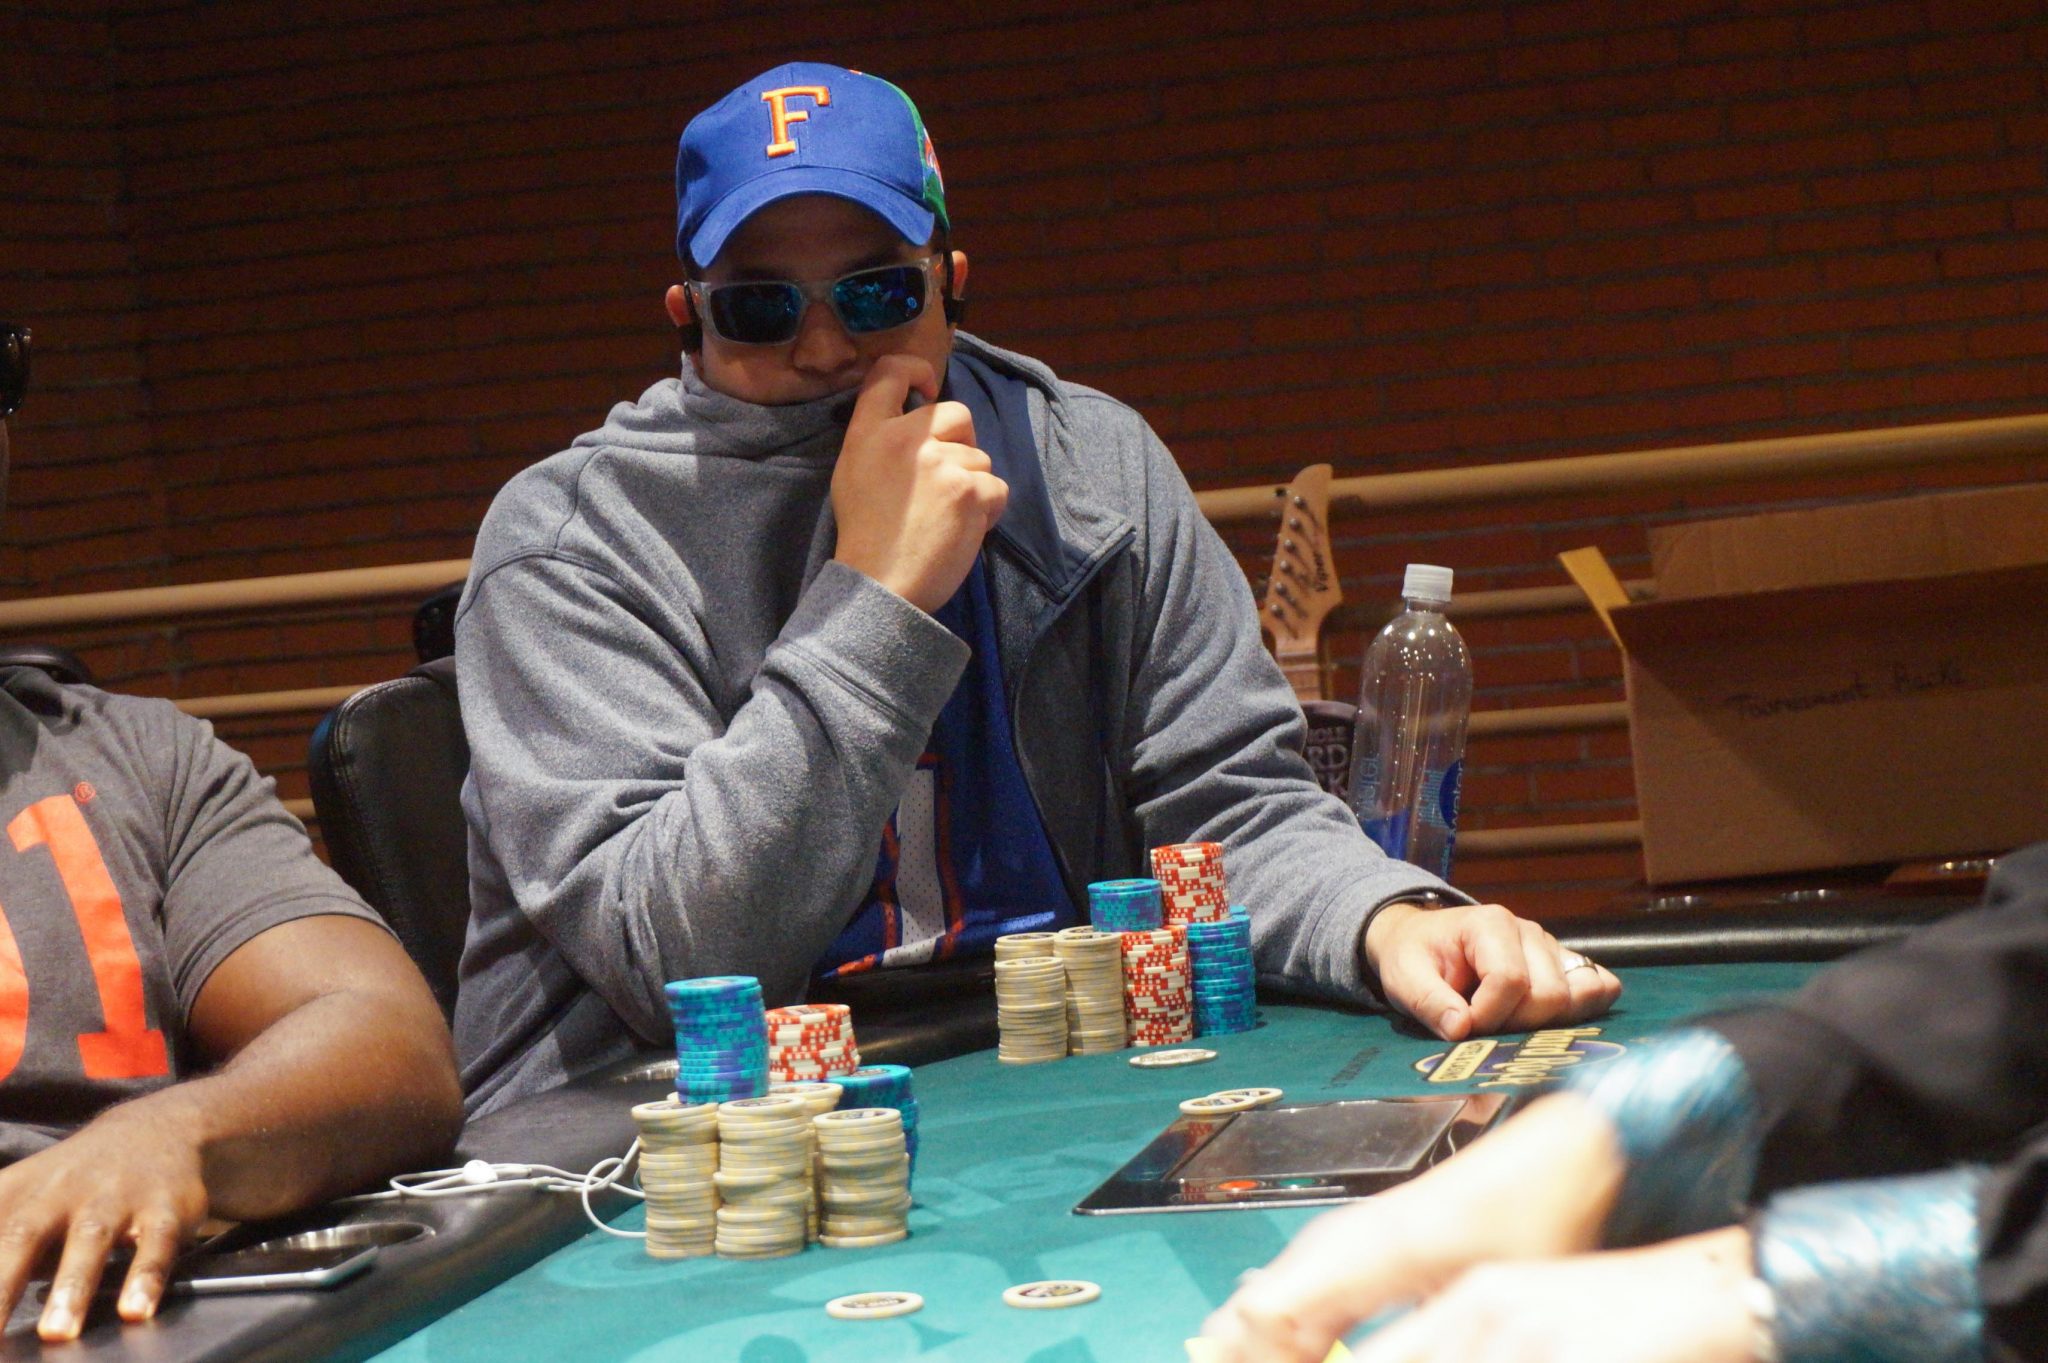 Ronald Campillo, 2nd place ($39,200)